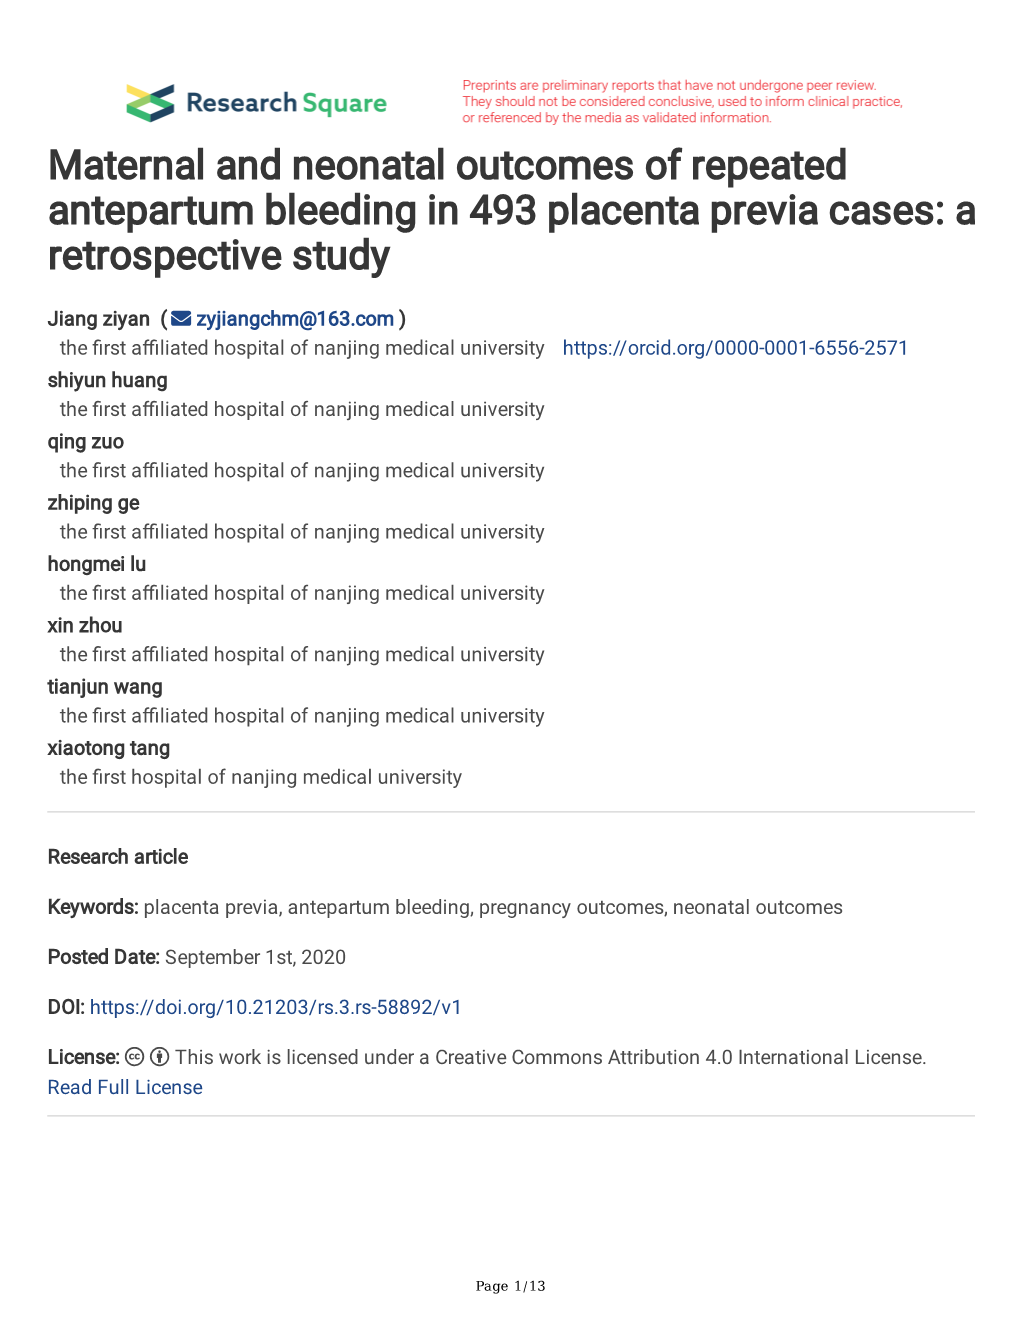 Maternal and Neonatal Outcomes of Repeated Antepartum Bleeding in 493 Placenta Previa Cases: a Retrospective Study